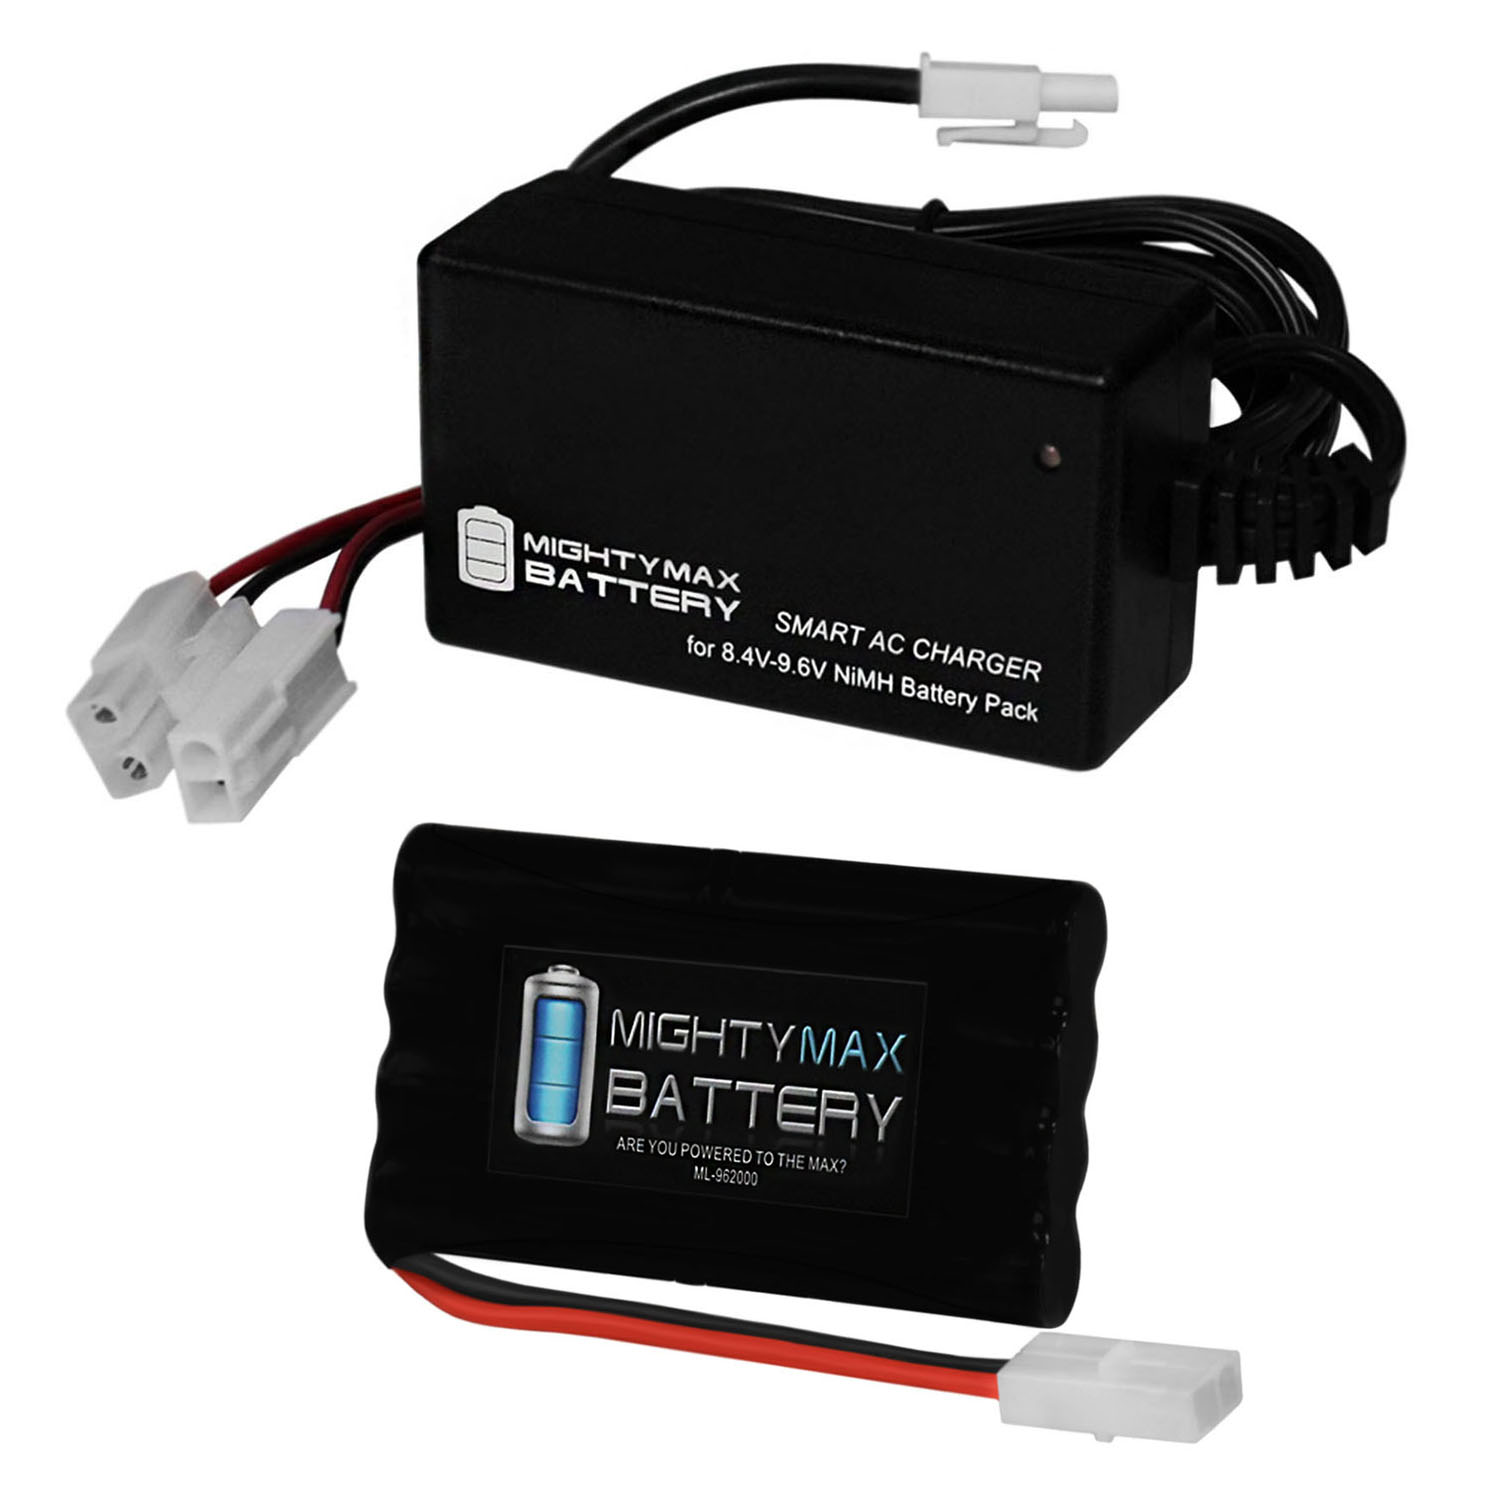 9.6V 2000mAh NiMh REPLACEMENT BATTERY FOR NIKKO RC CARS + SMART CHARGER